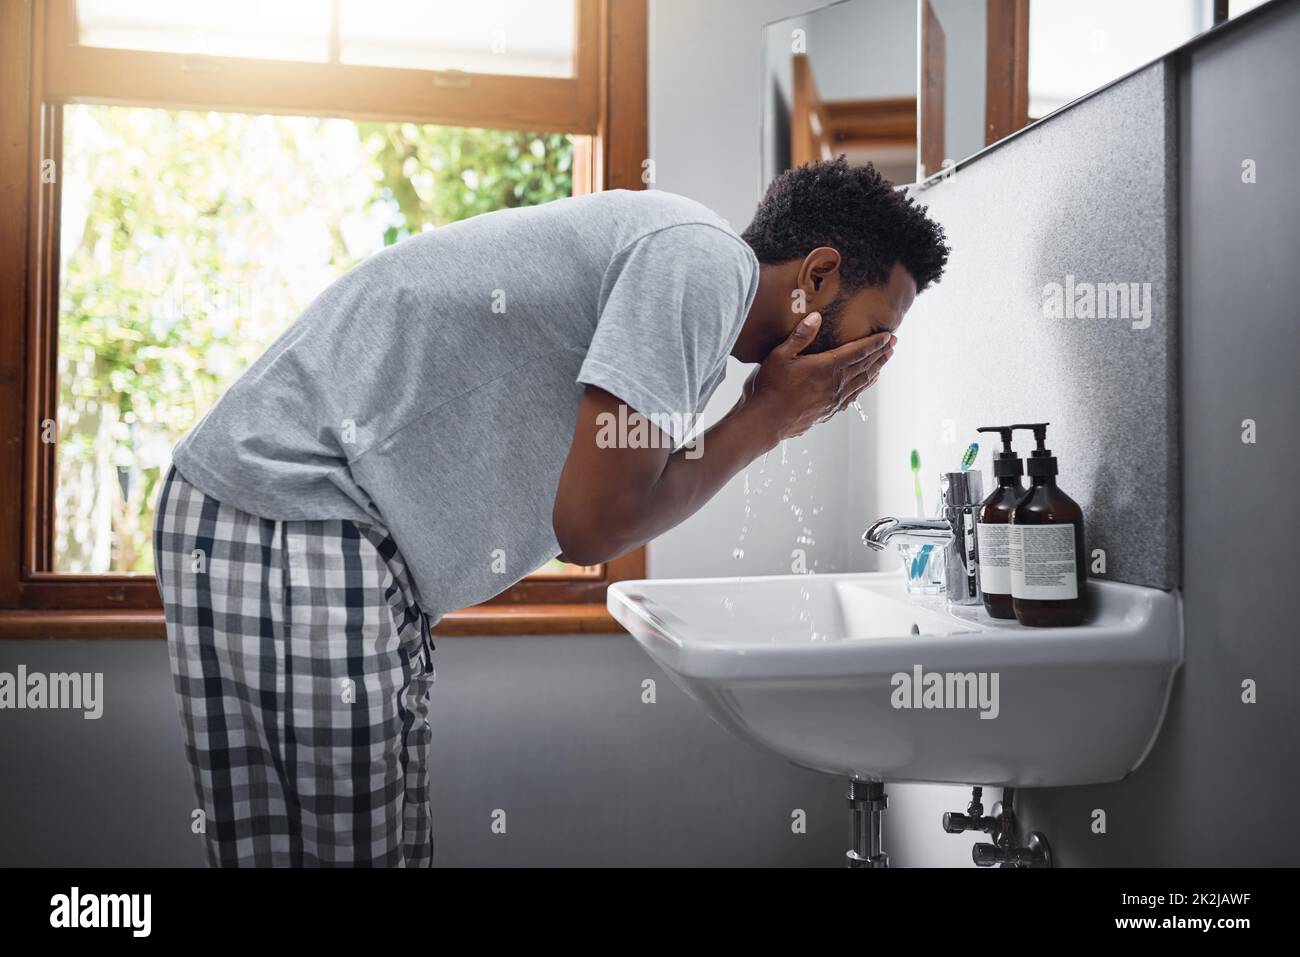 Freshening up. Cropped shot of a handsome young man washing his face in the bathroom at home. Stock Photo